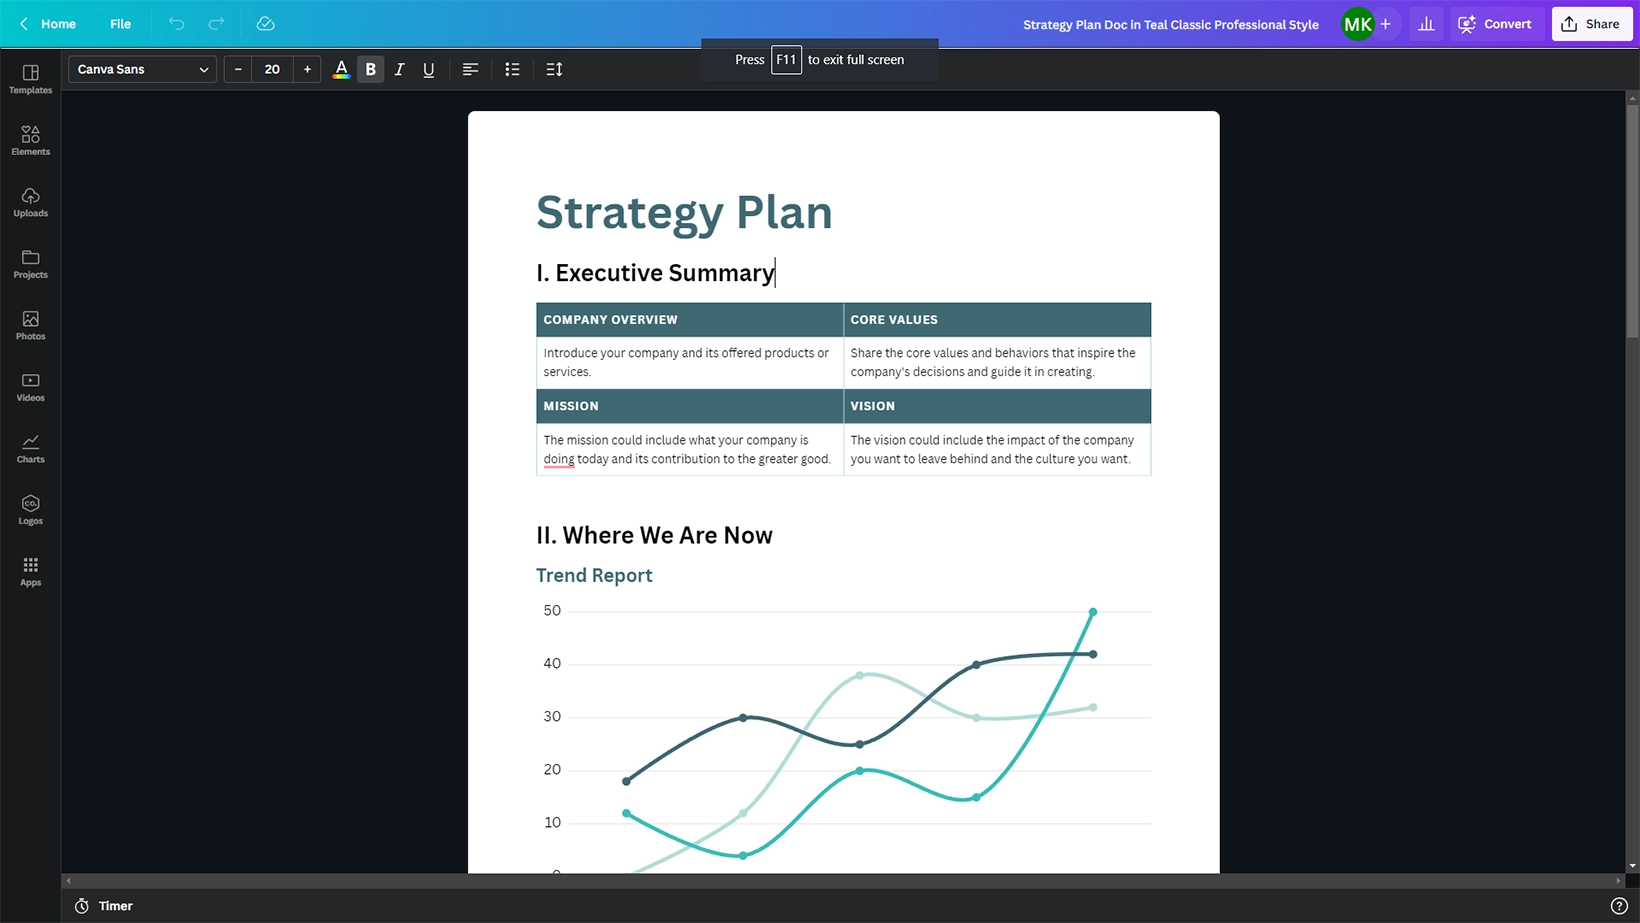 Strategy Plan Doc for Canva